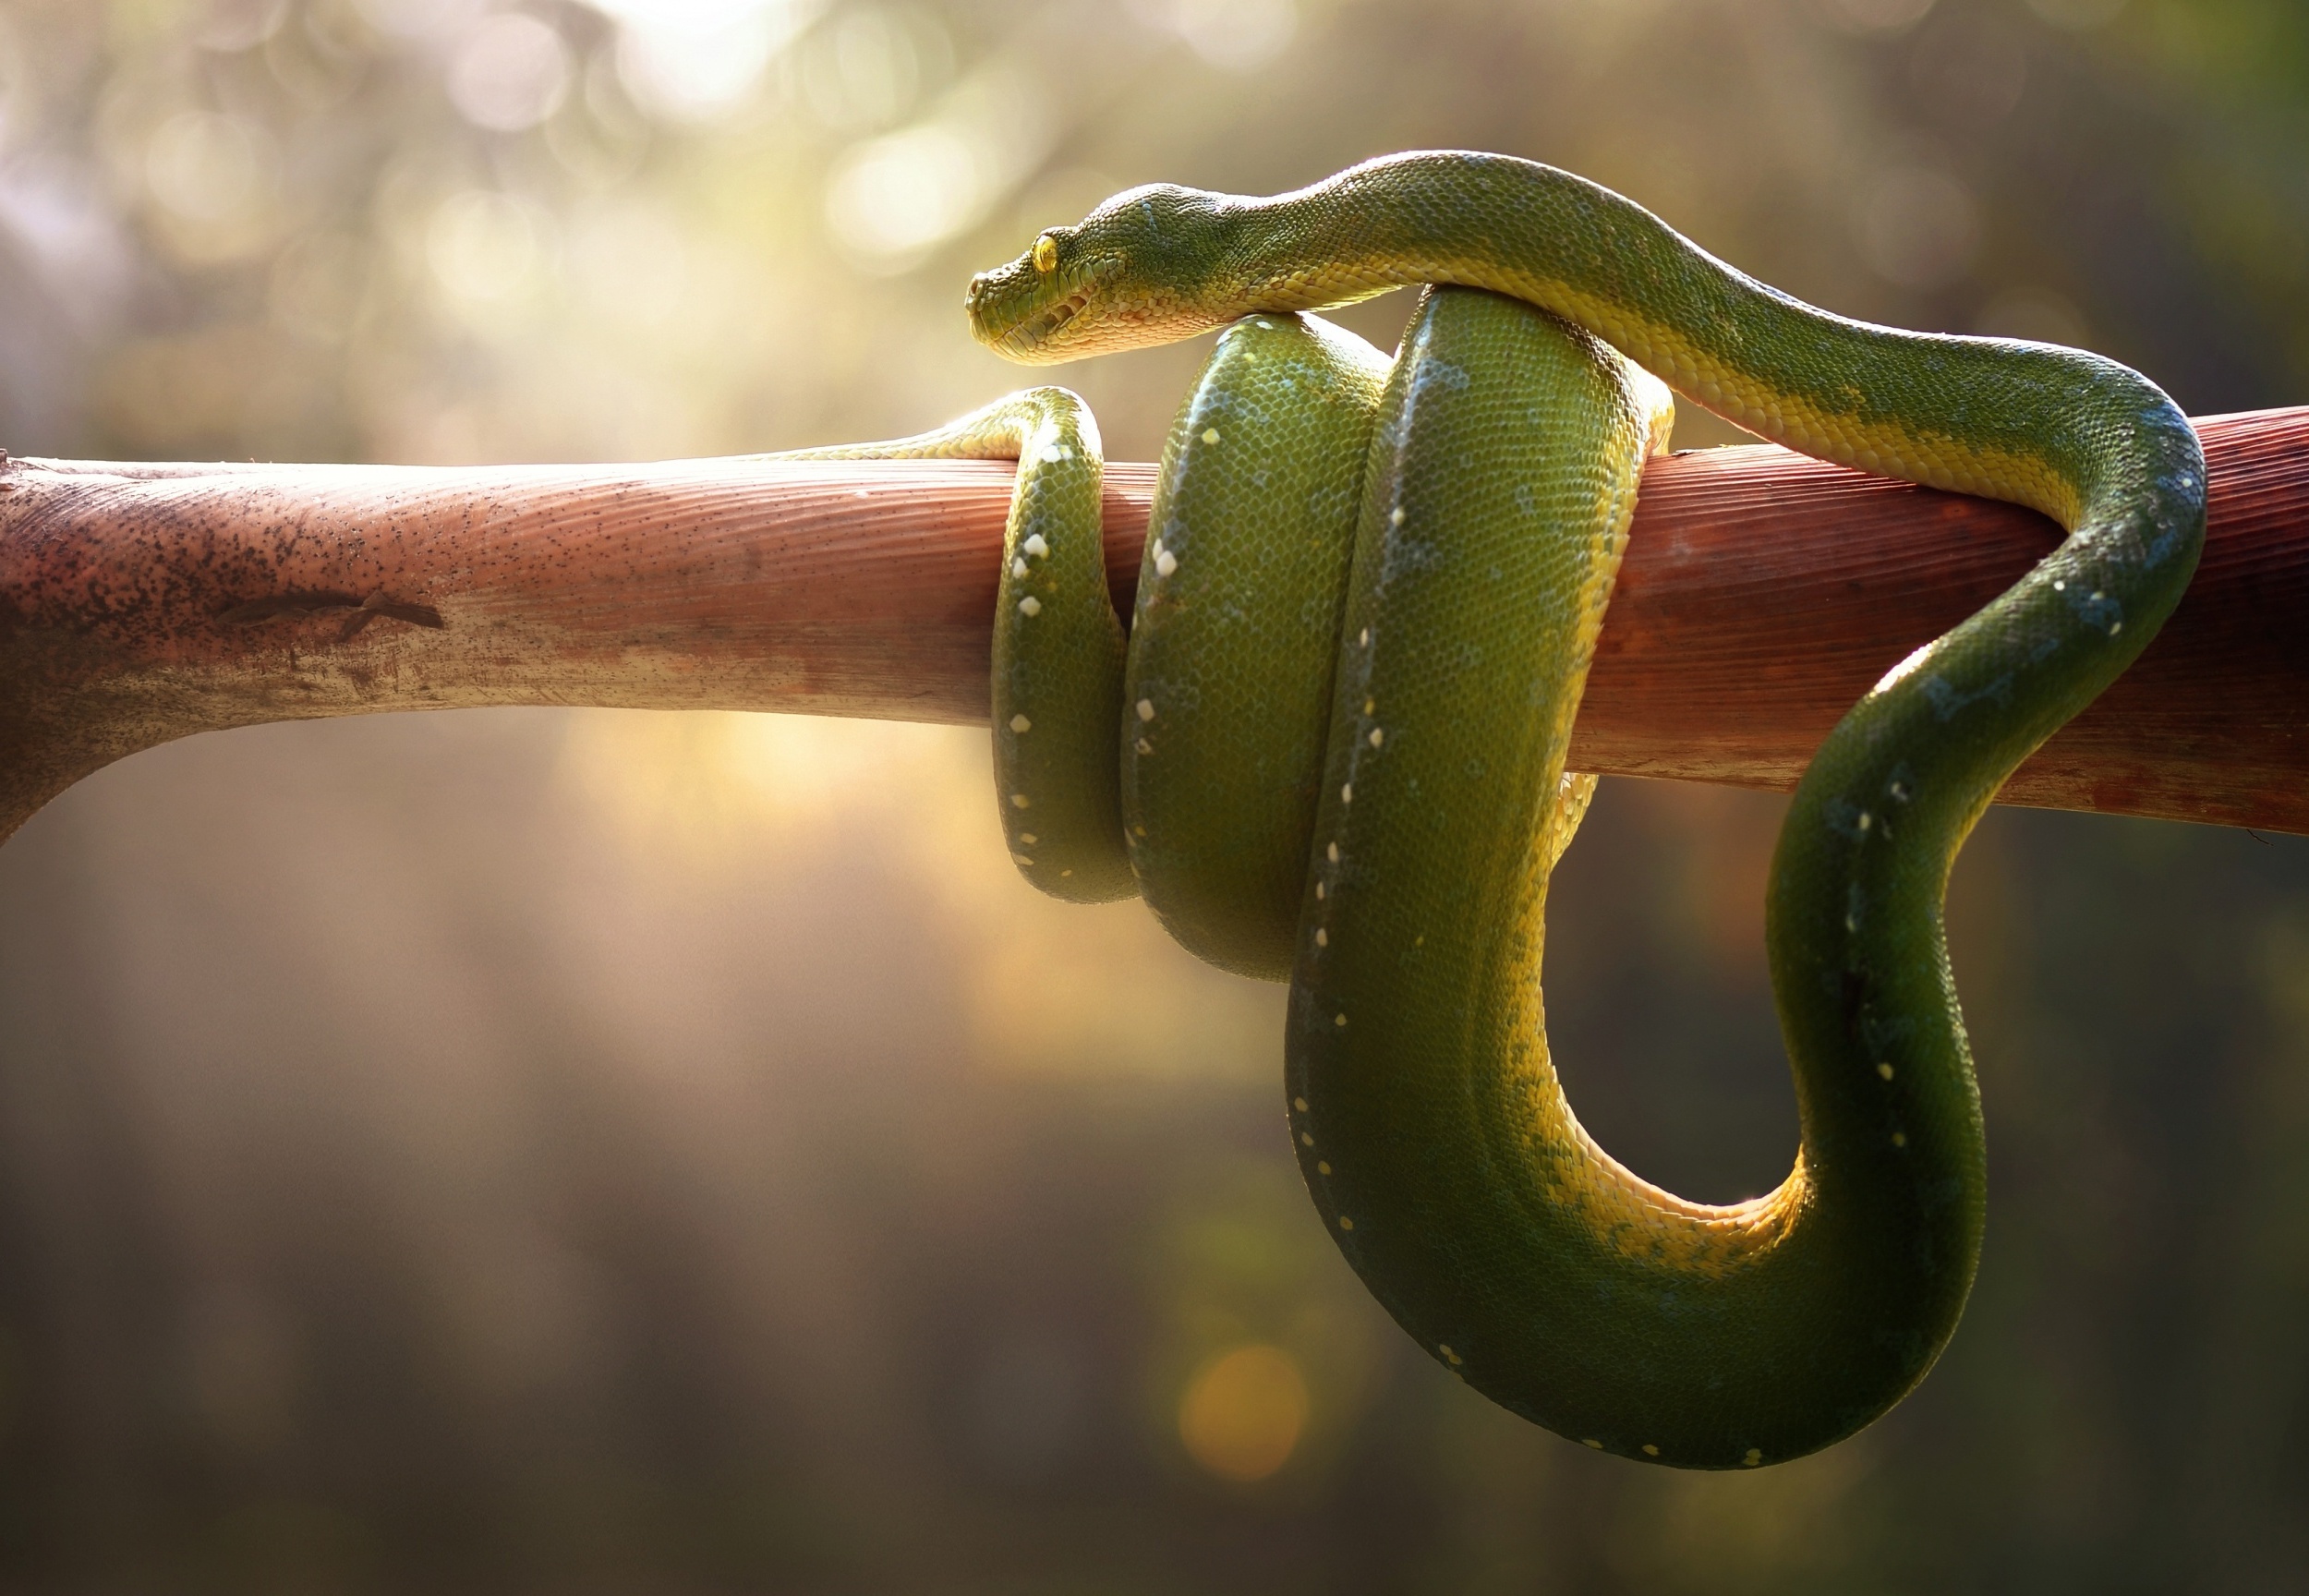 Snake Wrapped Around A Tree - HD Wallpaper 